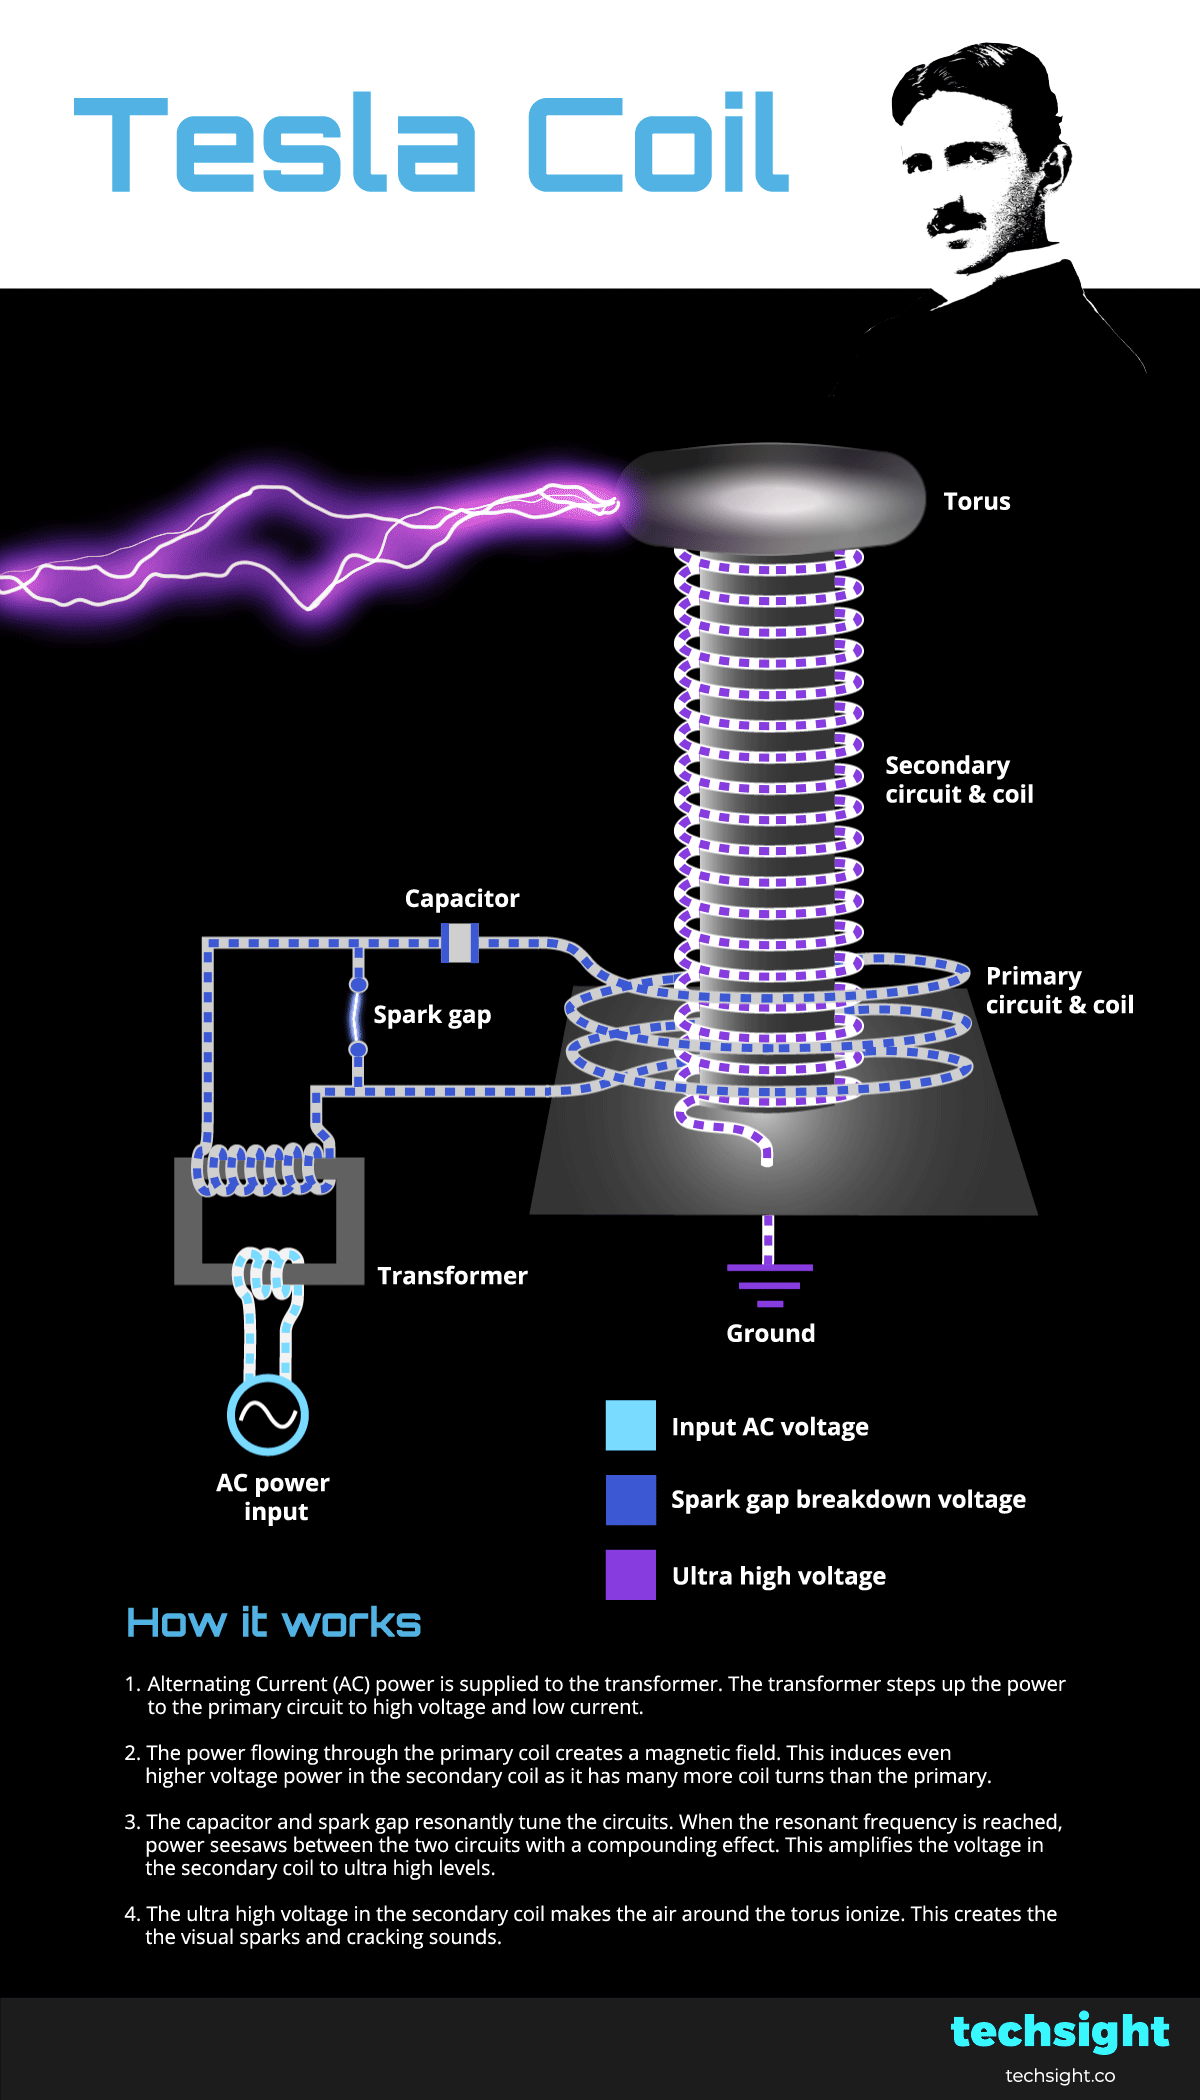 Tesla Coil - Animated Schematic - Techsight